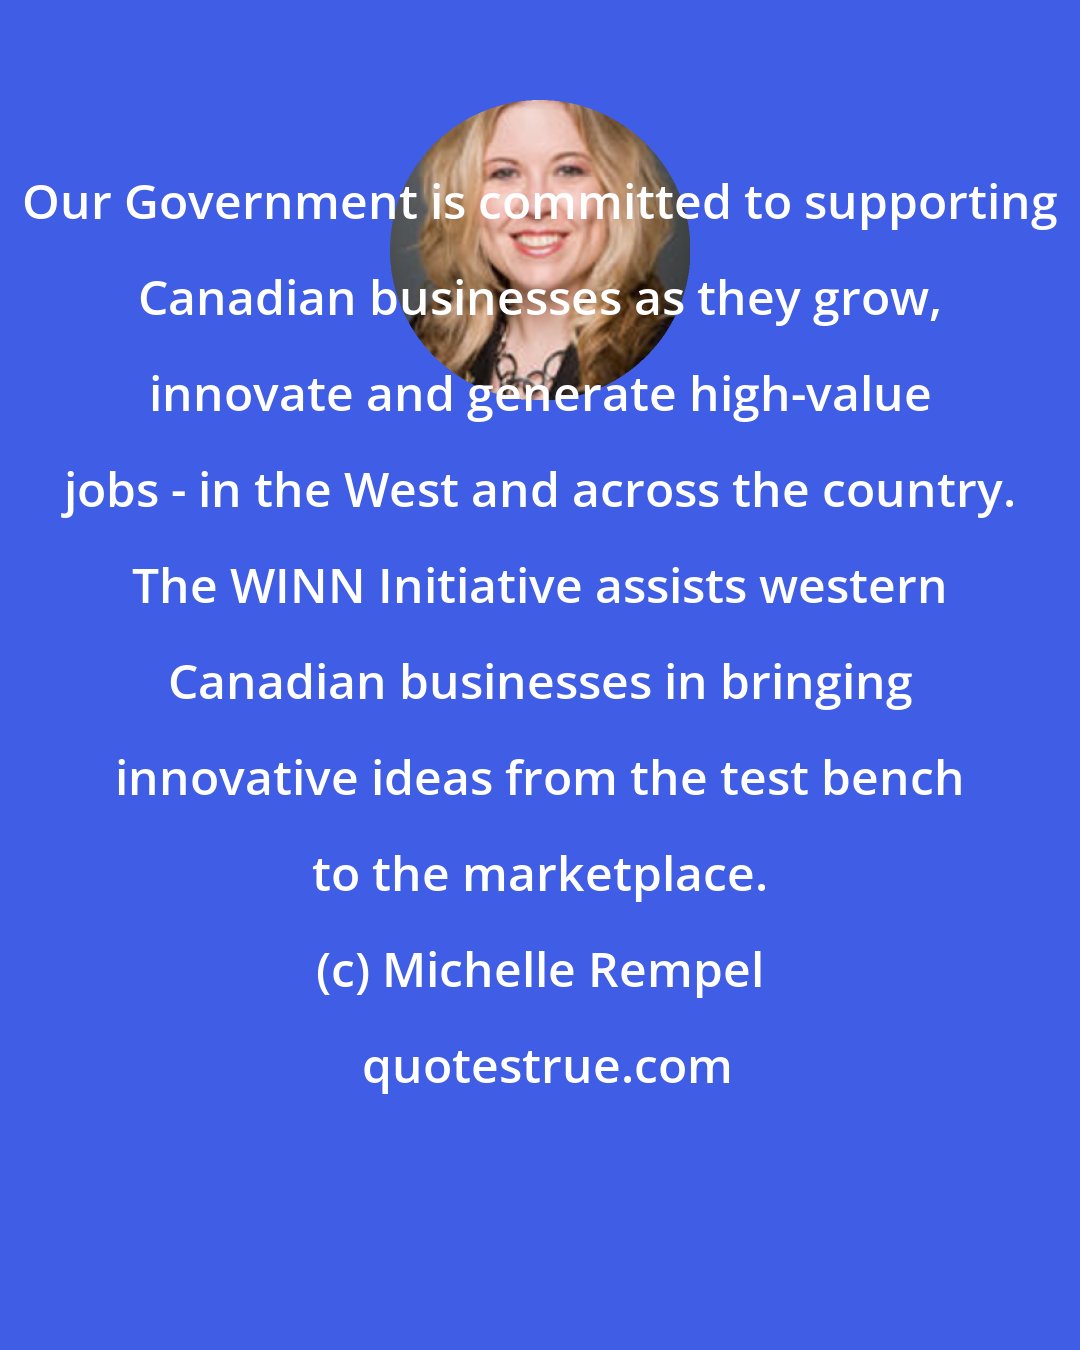 Michelle Rempel: Our Government is committed to supporting Canadian businesses as they grow, innovate and generate high-value jobs - in the West and across the country. The WINN Initiative assists western Canadian businesses in bringing innovative ideas from the test bench to the marketplace.